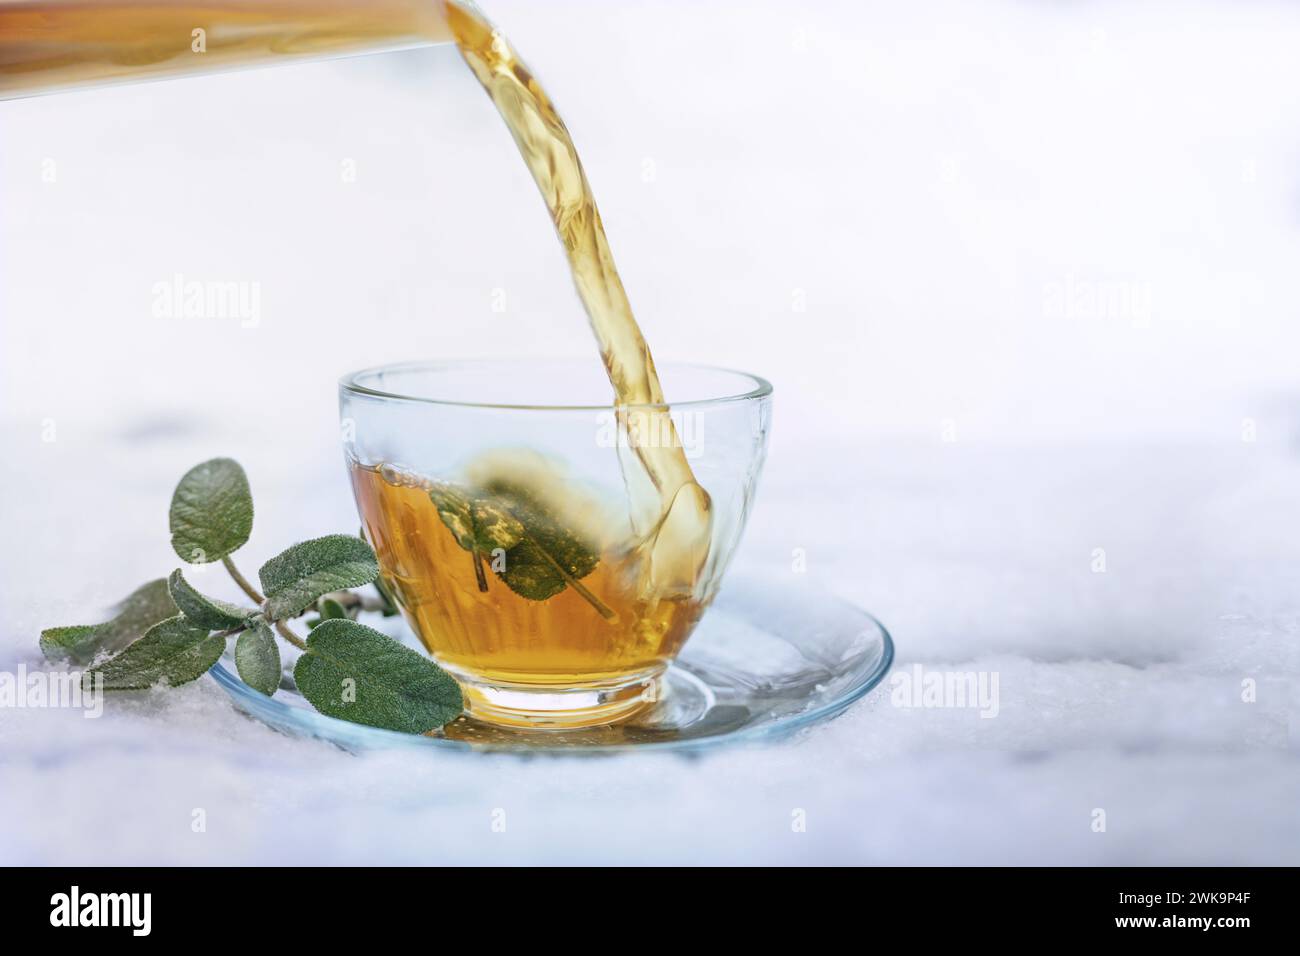 Hot sage tea is poured in a glass cup with some leaves standing outdoors in the white snow, herbal medicine and home remedy against flu and cold in th Stock Photo